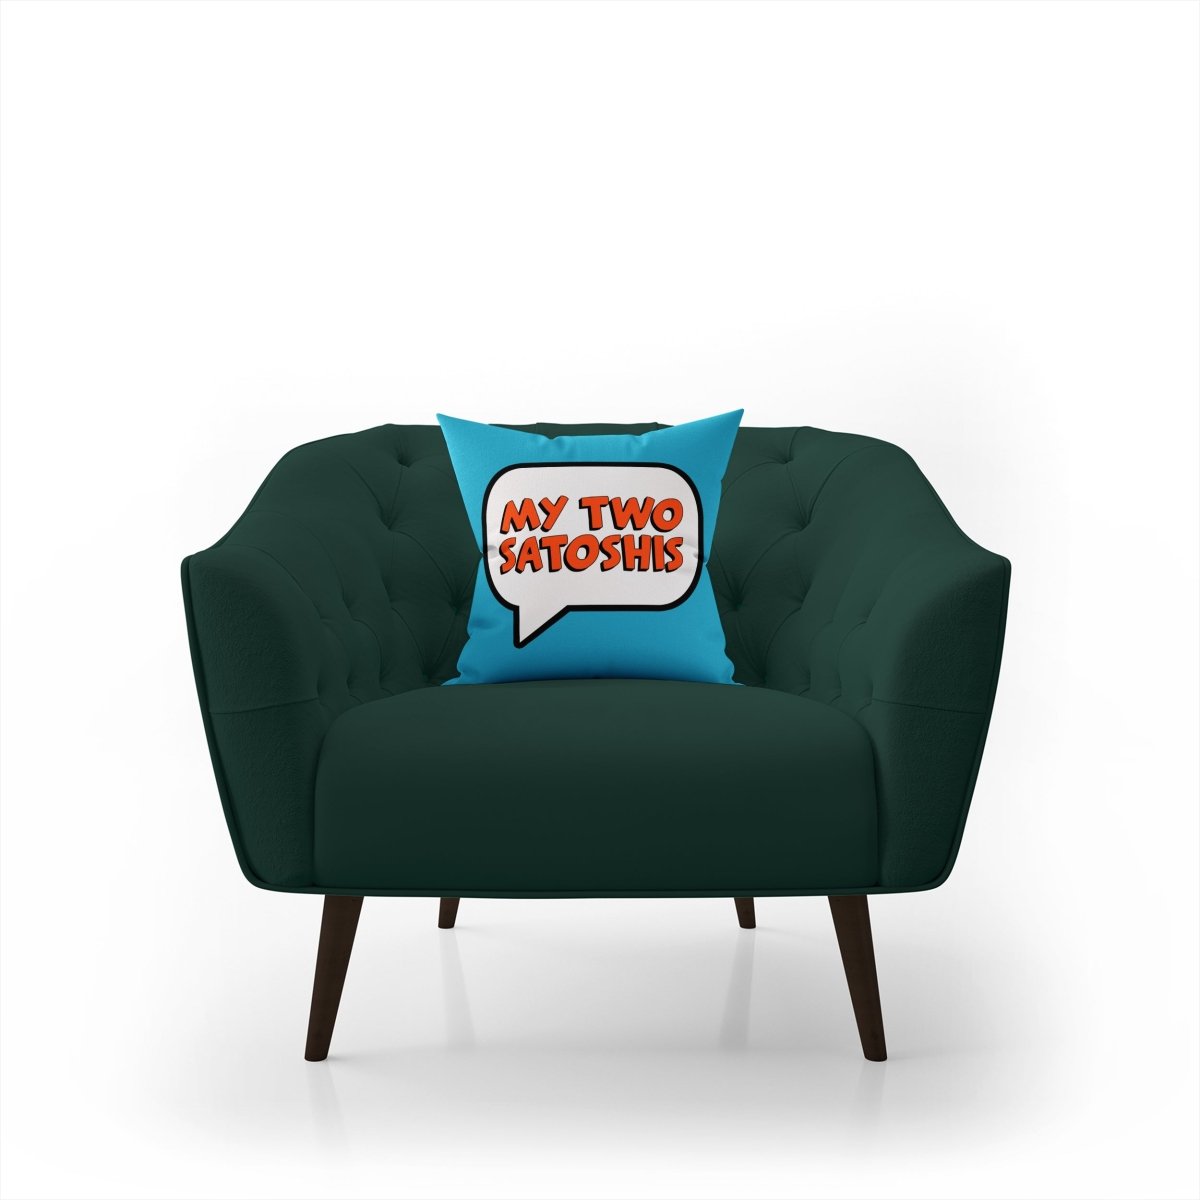 Cryptocurrency Gift Ideas - My Two Satoshis Pillow displayed on green armchair.